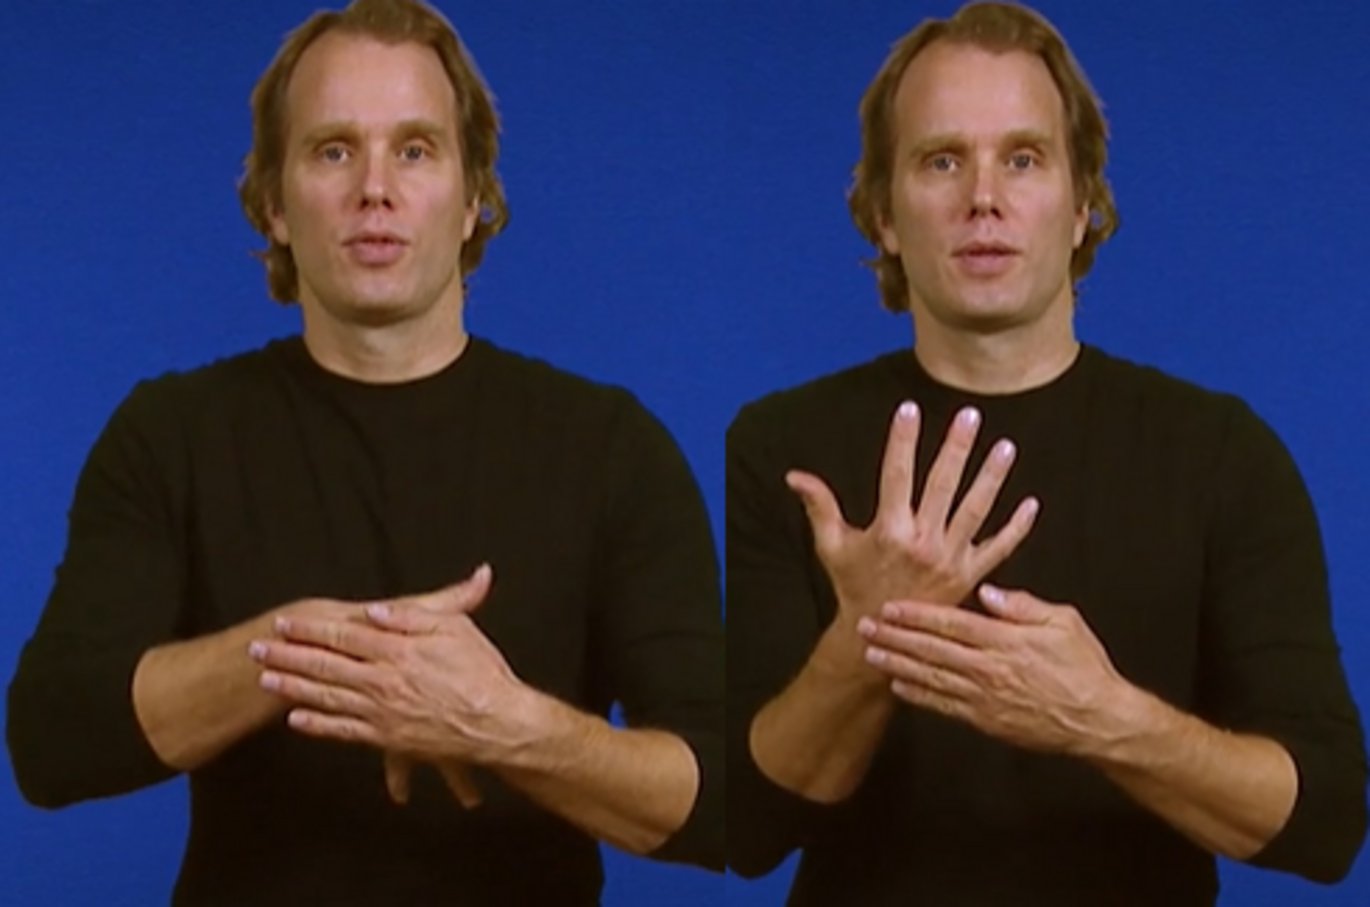 Pictures that demonstrates how to say Norden/Nordic using signlanguage